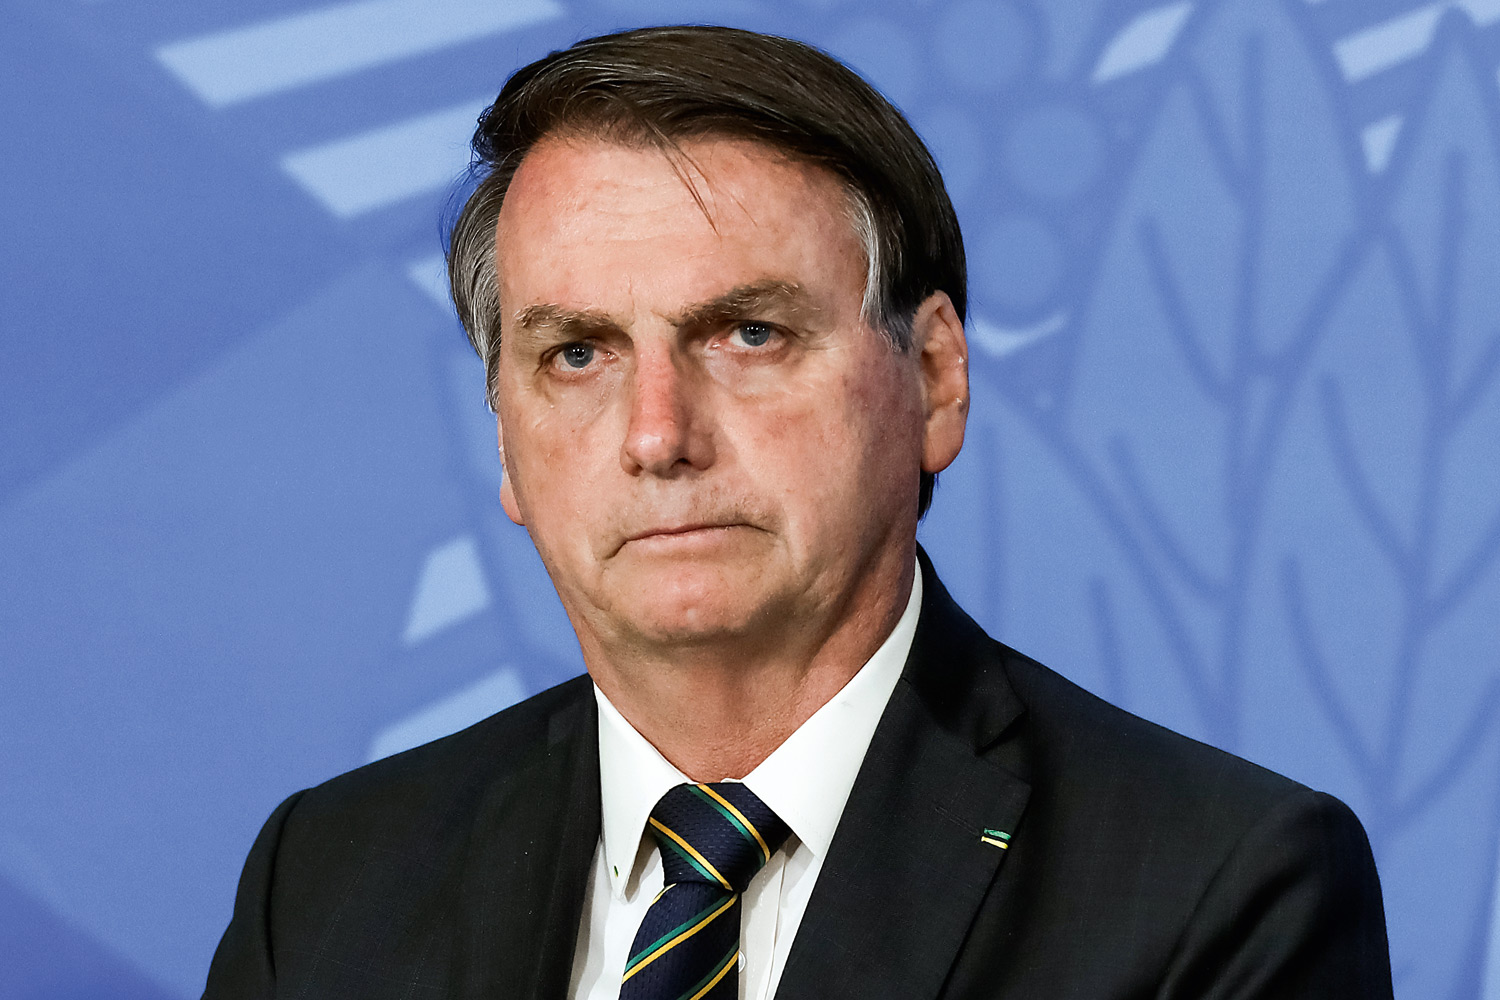 A Datafolha survey released on Wednesday shows that 17 percent of those who voted for Jair Bolsonaro for President in 2018 said they regretted it.